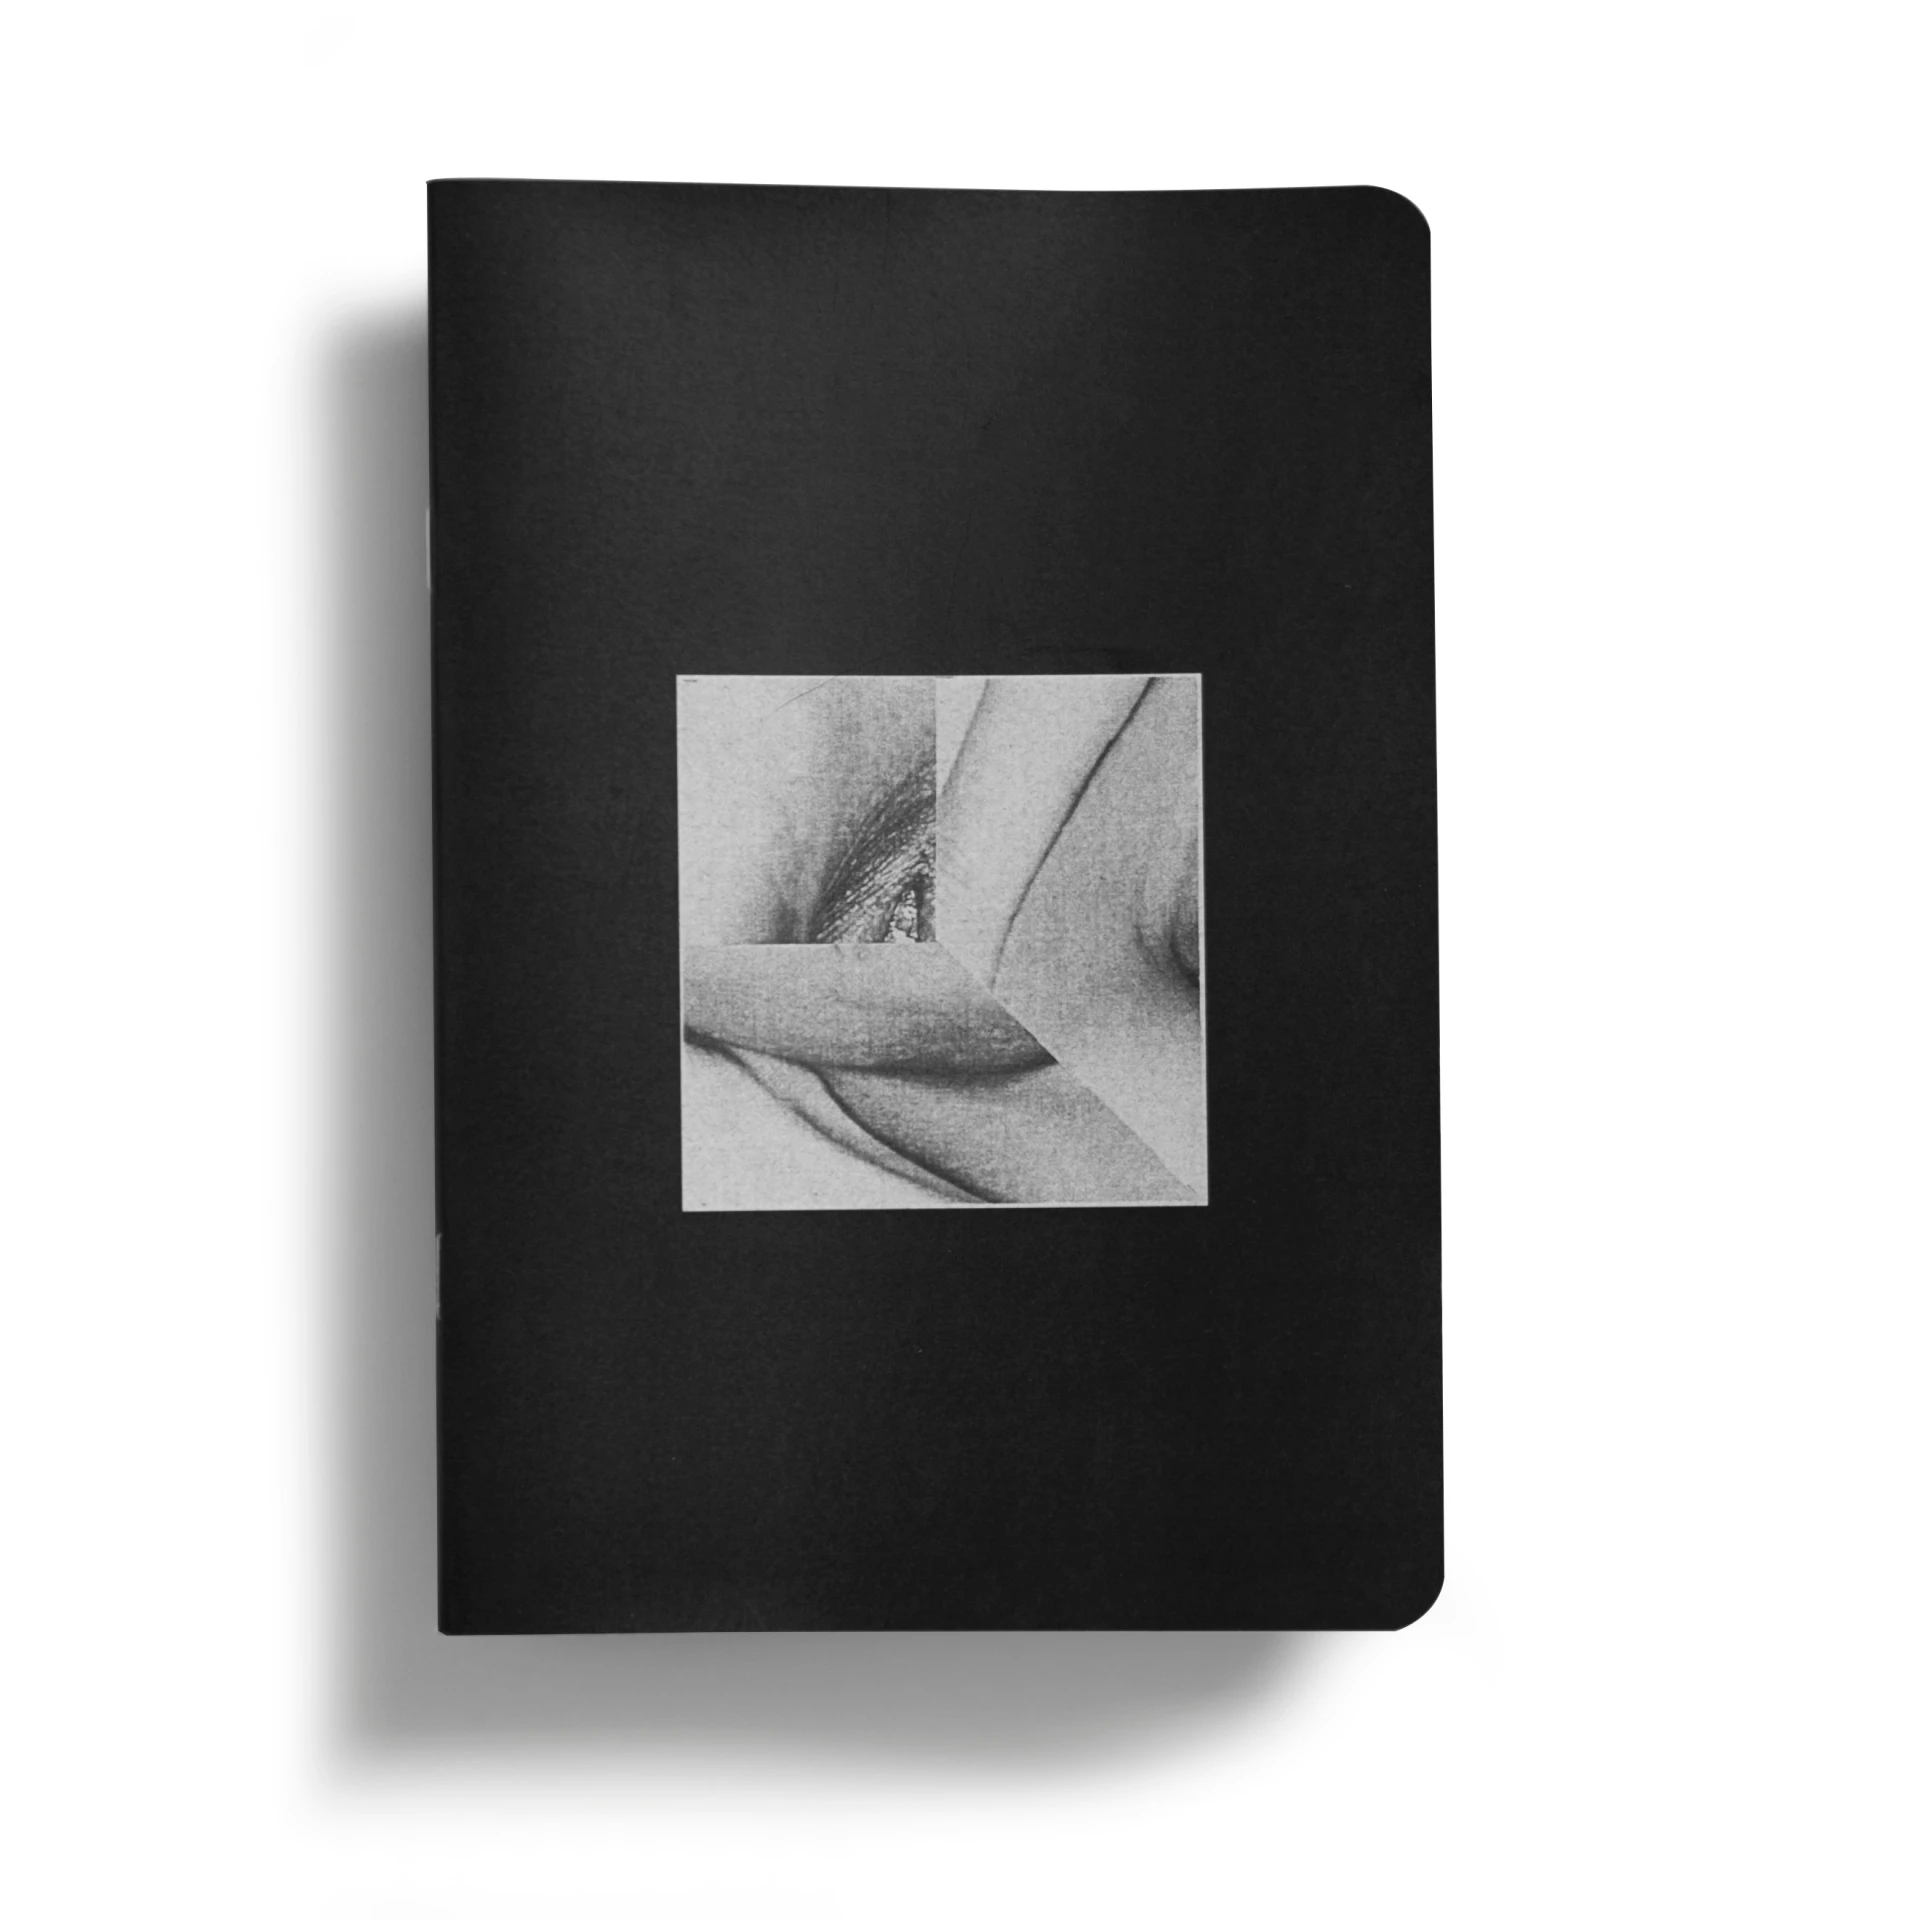 the book cover is black and white and has an image of a person on a pillow